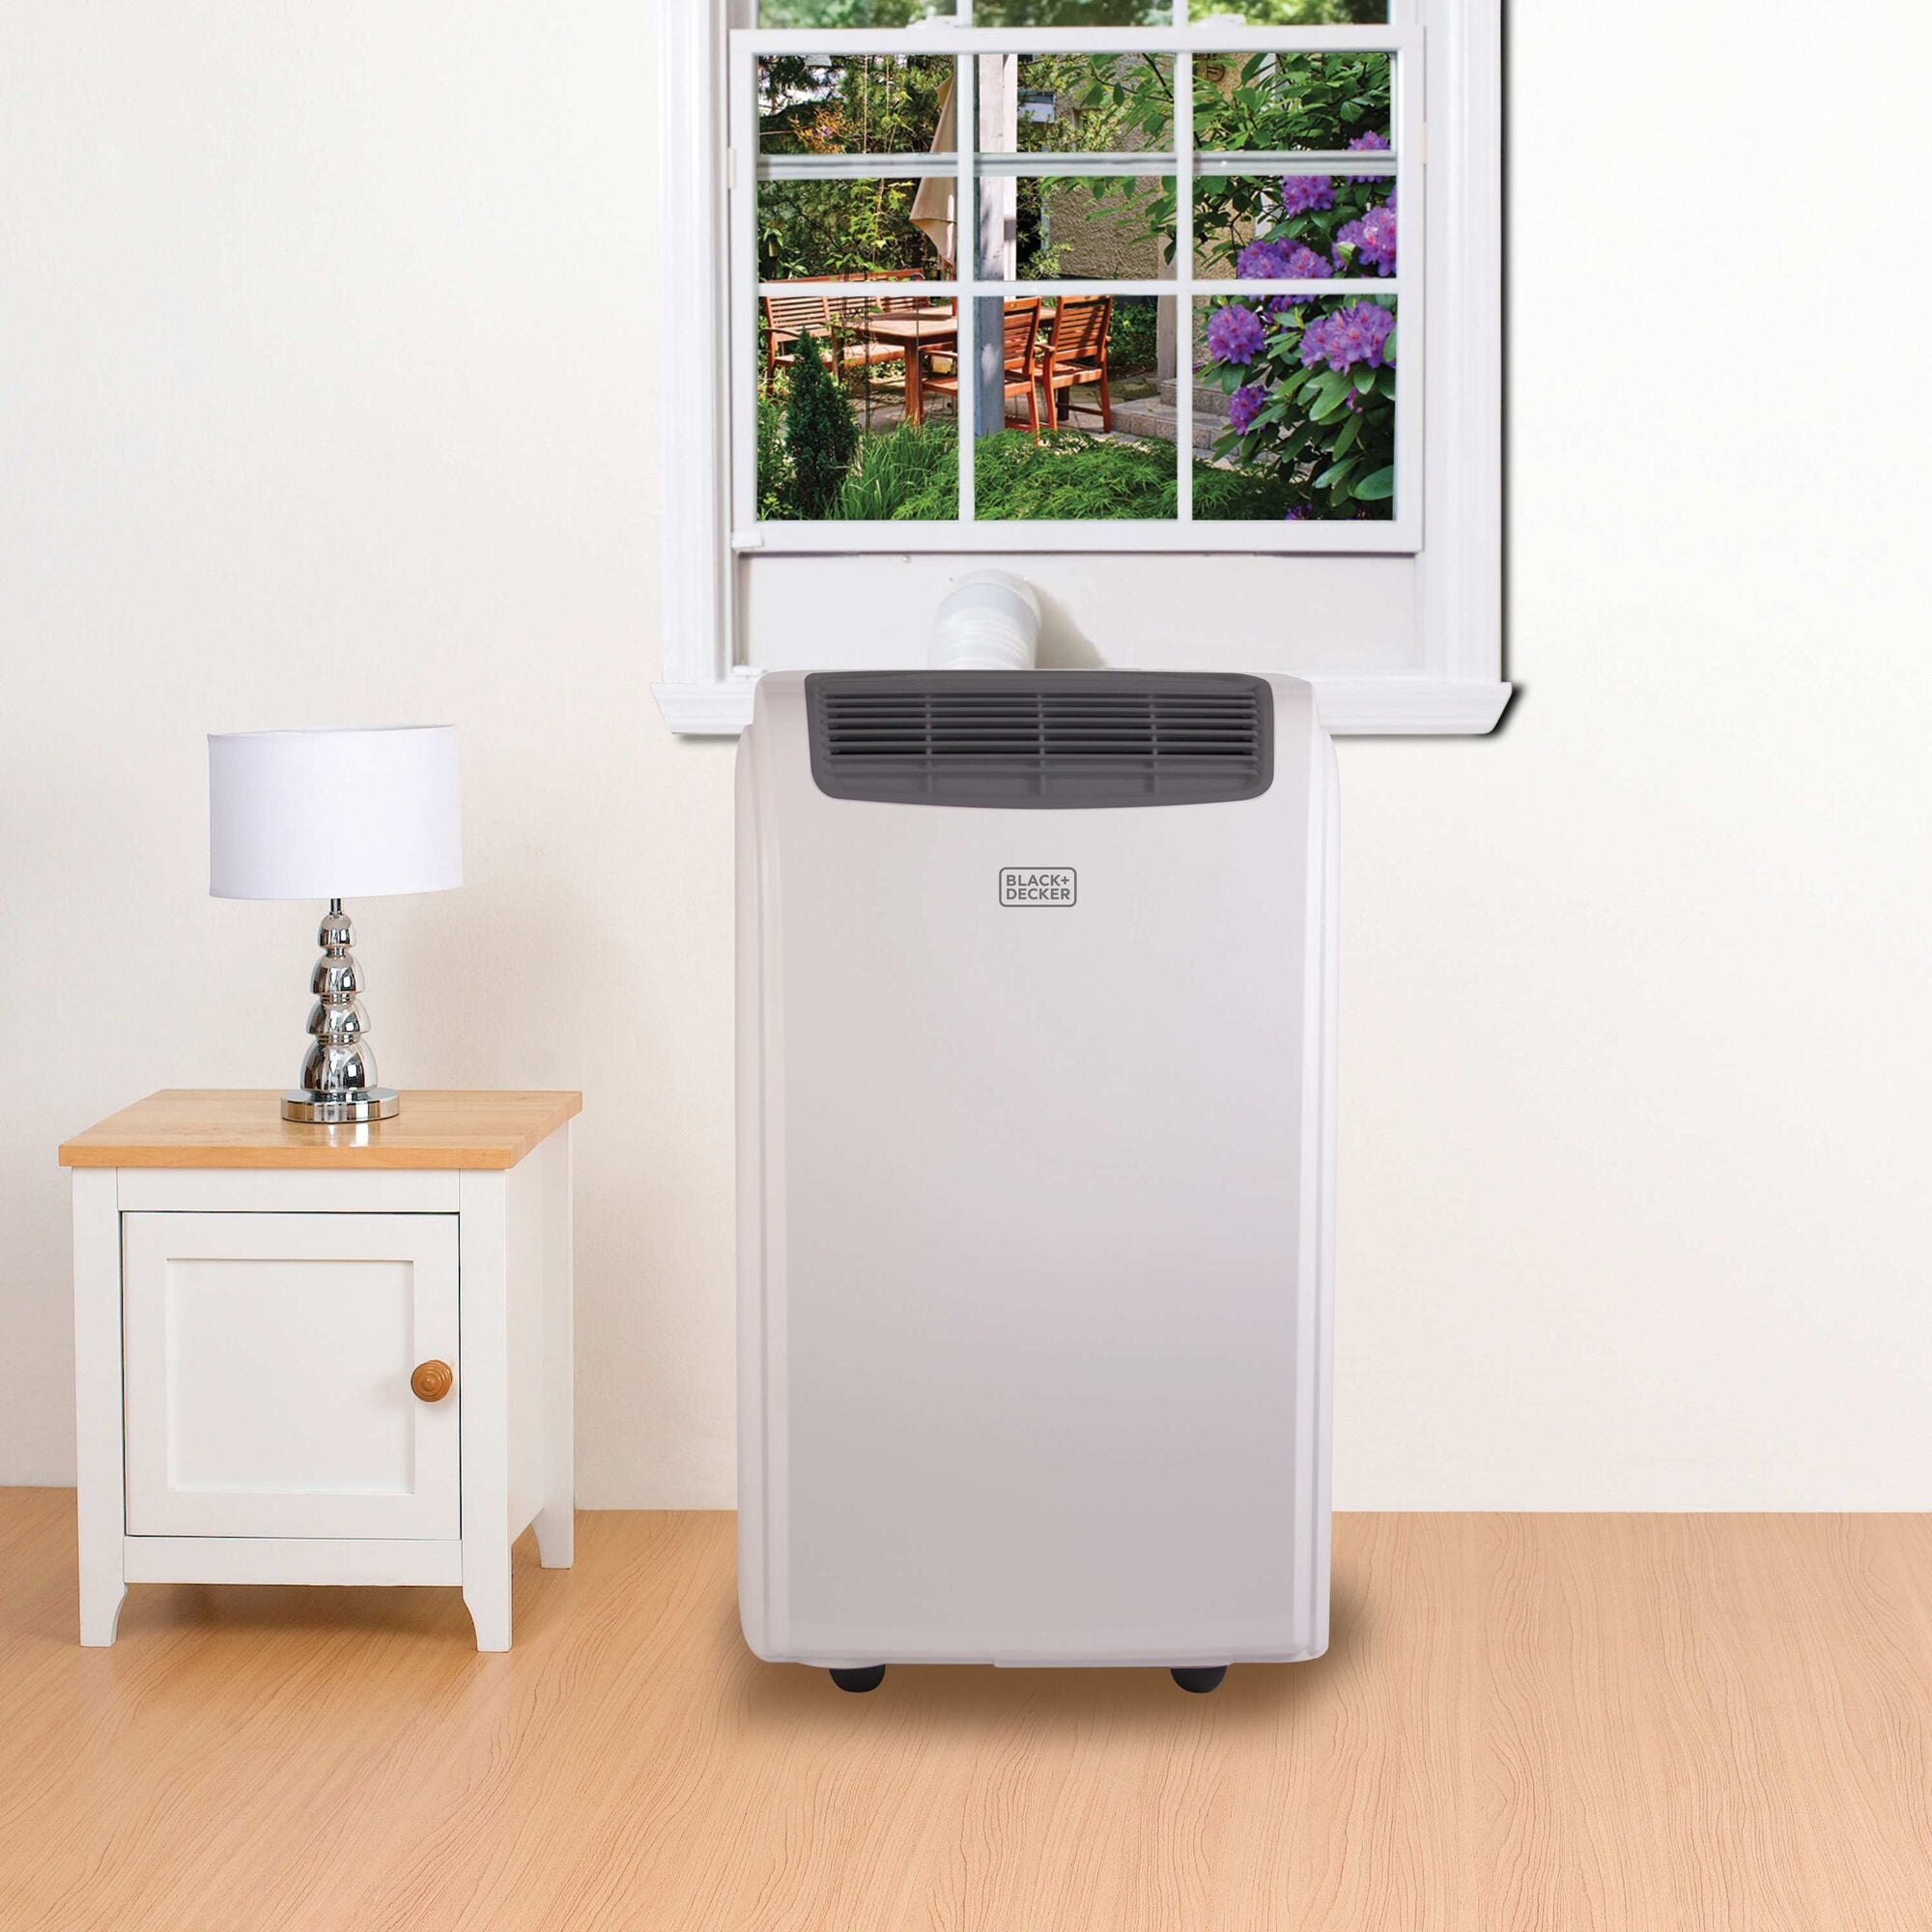 BLACK+DECKER BPACT12WT Portable Air Conditioner, 8-10 and 12,000 BTU  available , White - Air Conditioners, Facebook Marketplace